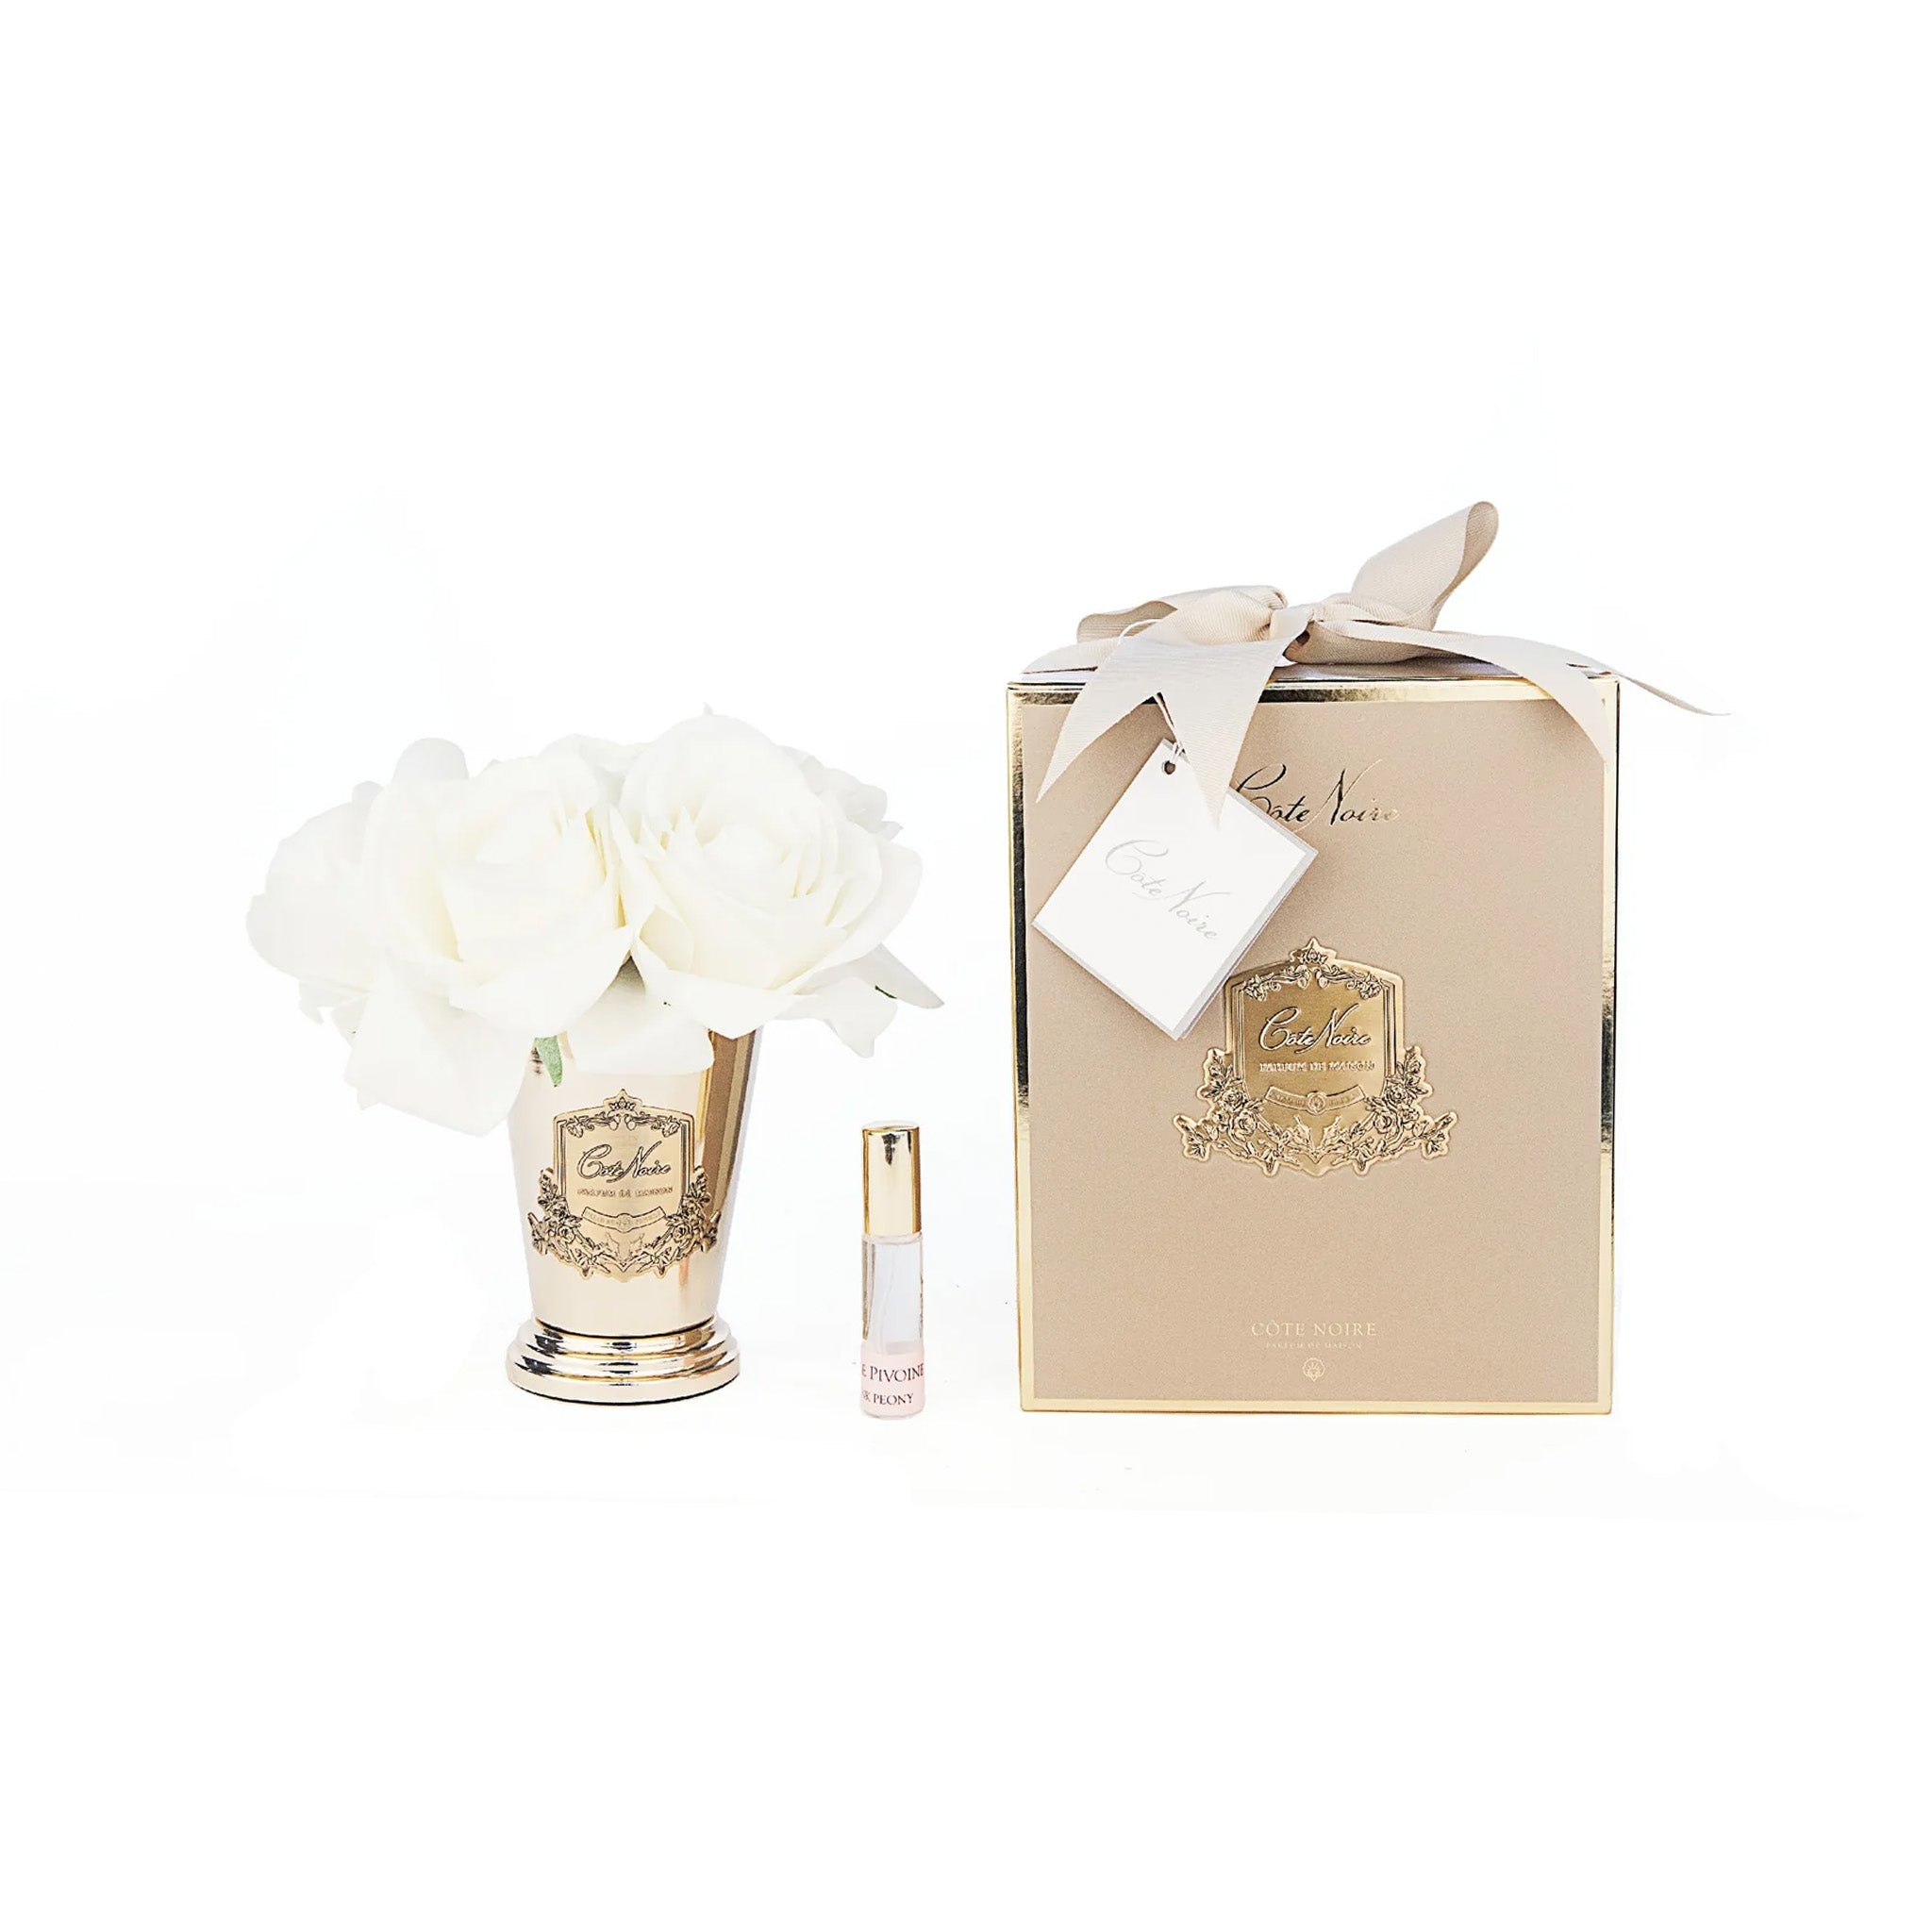 a bottle of perfume next to a gold vase with flowers by cote noire